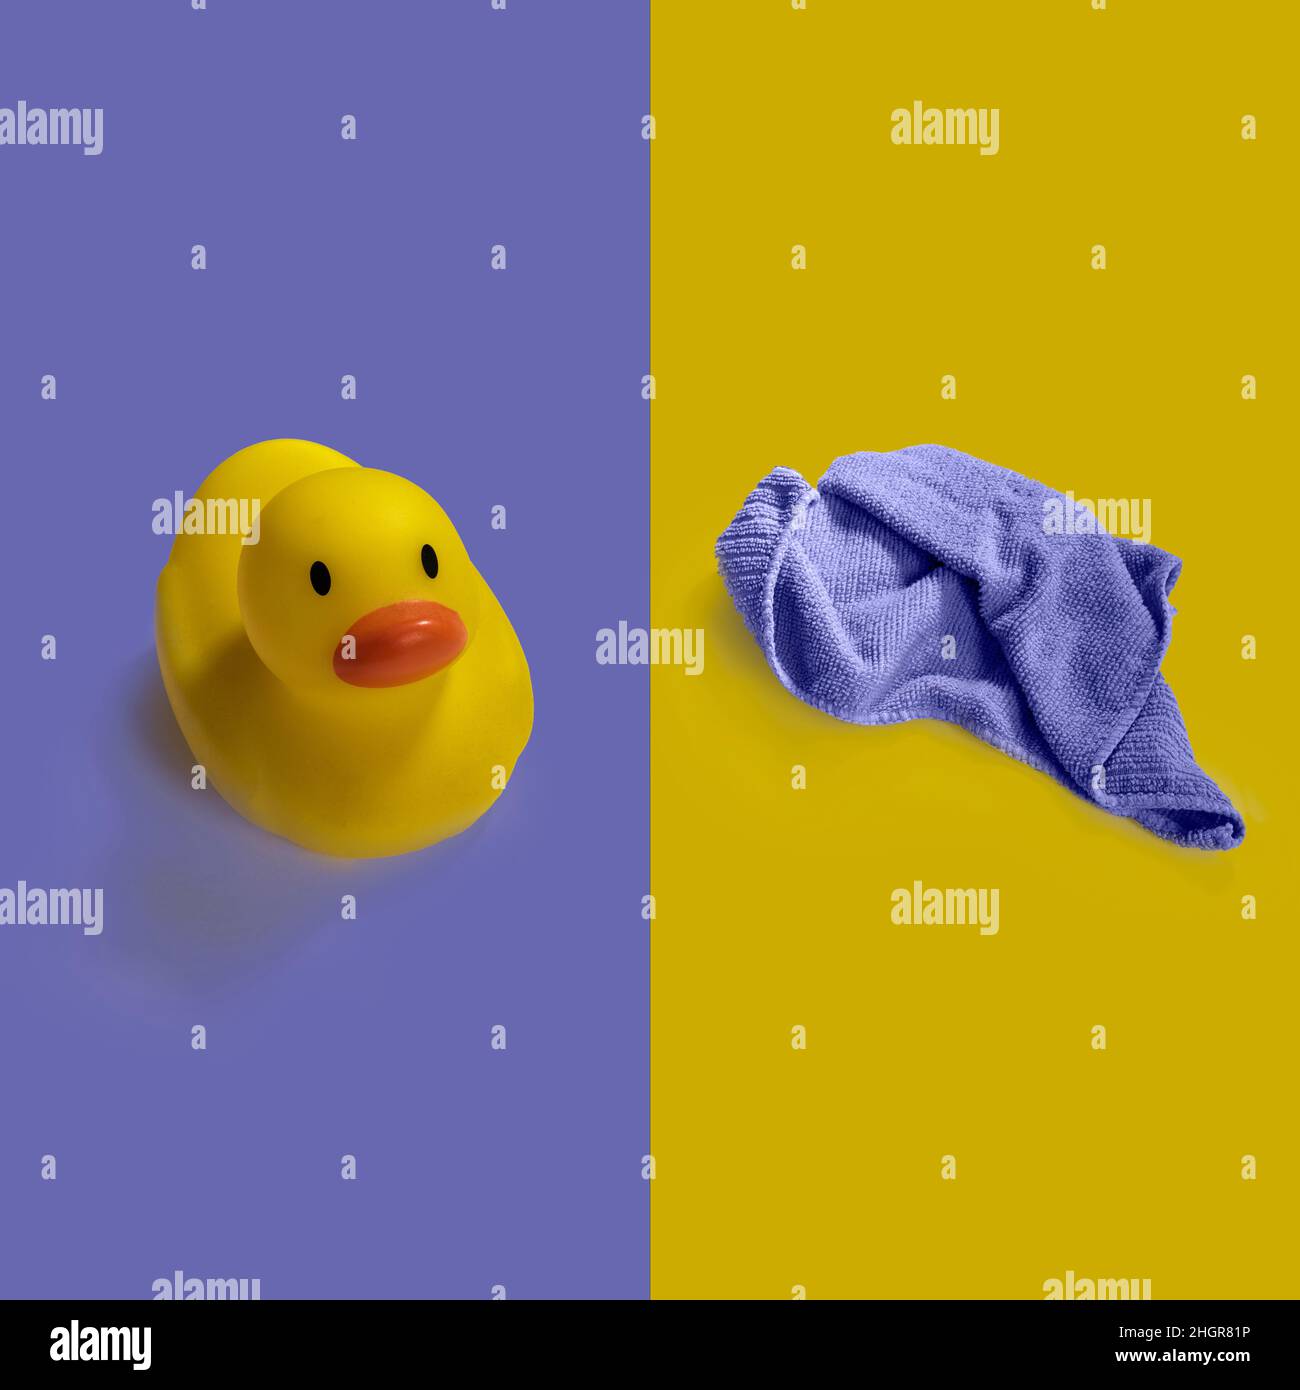 Yellow toy duck wtih a purple flannel on contrasting coloured backgrounds, Stock Photo